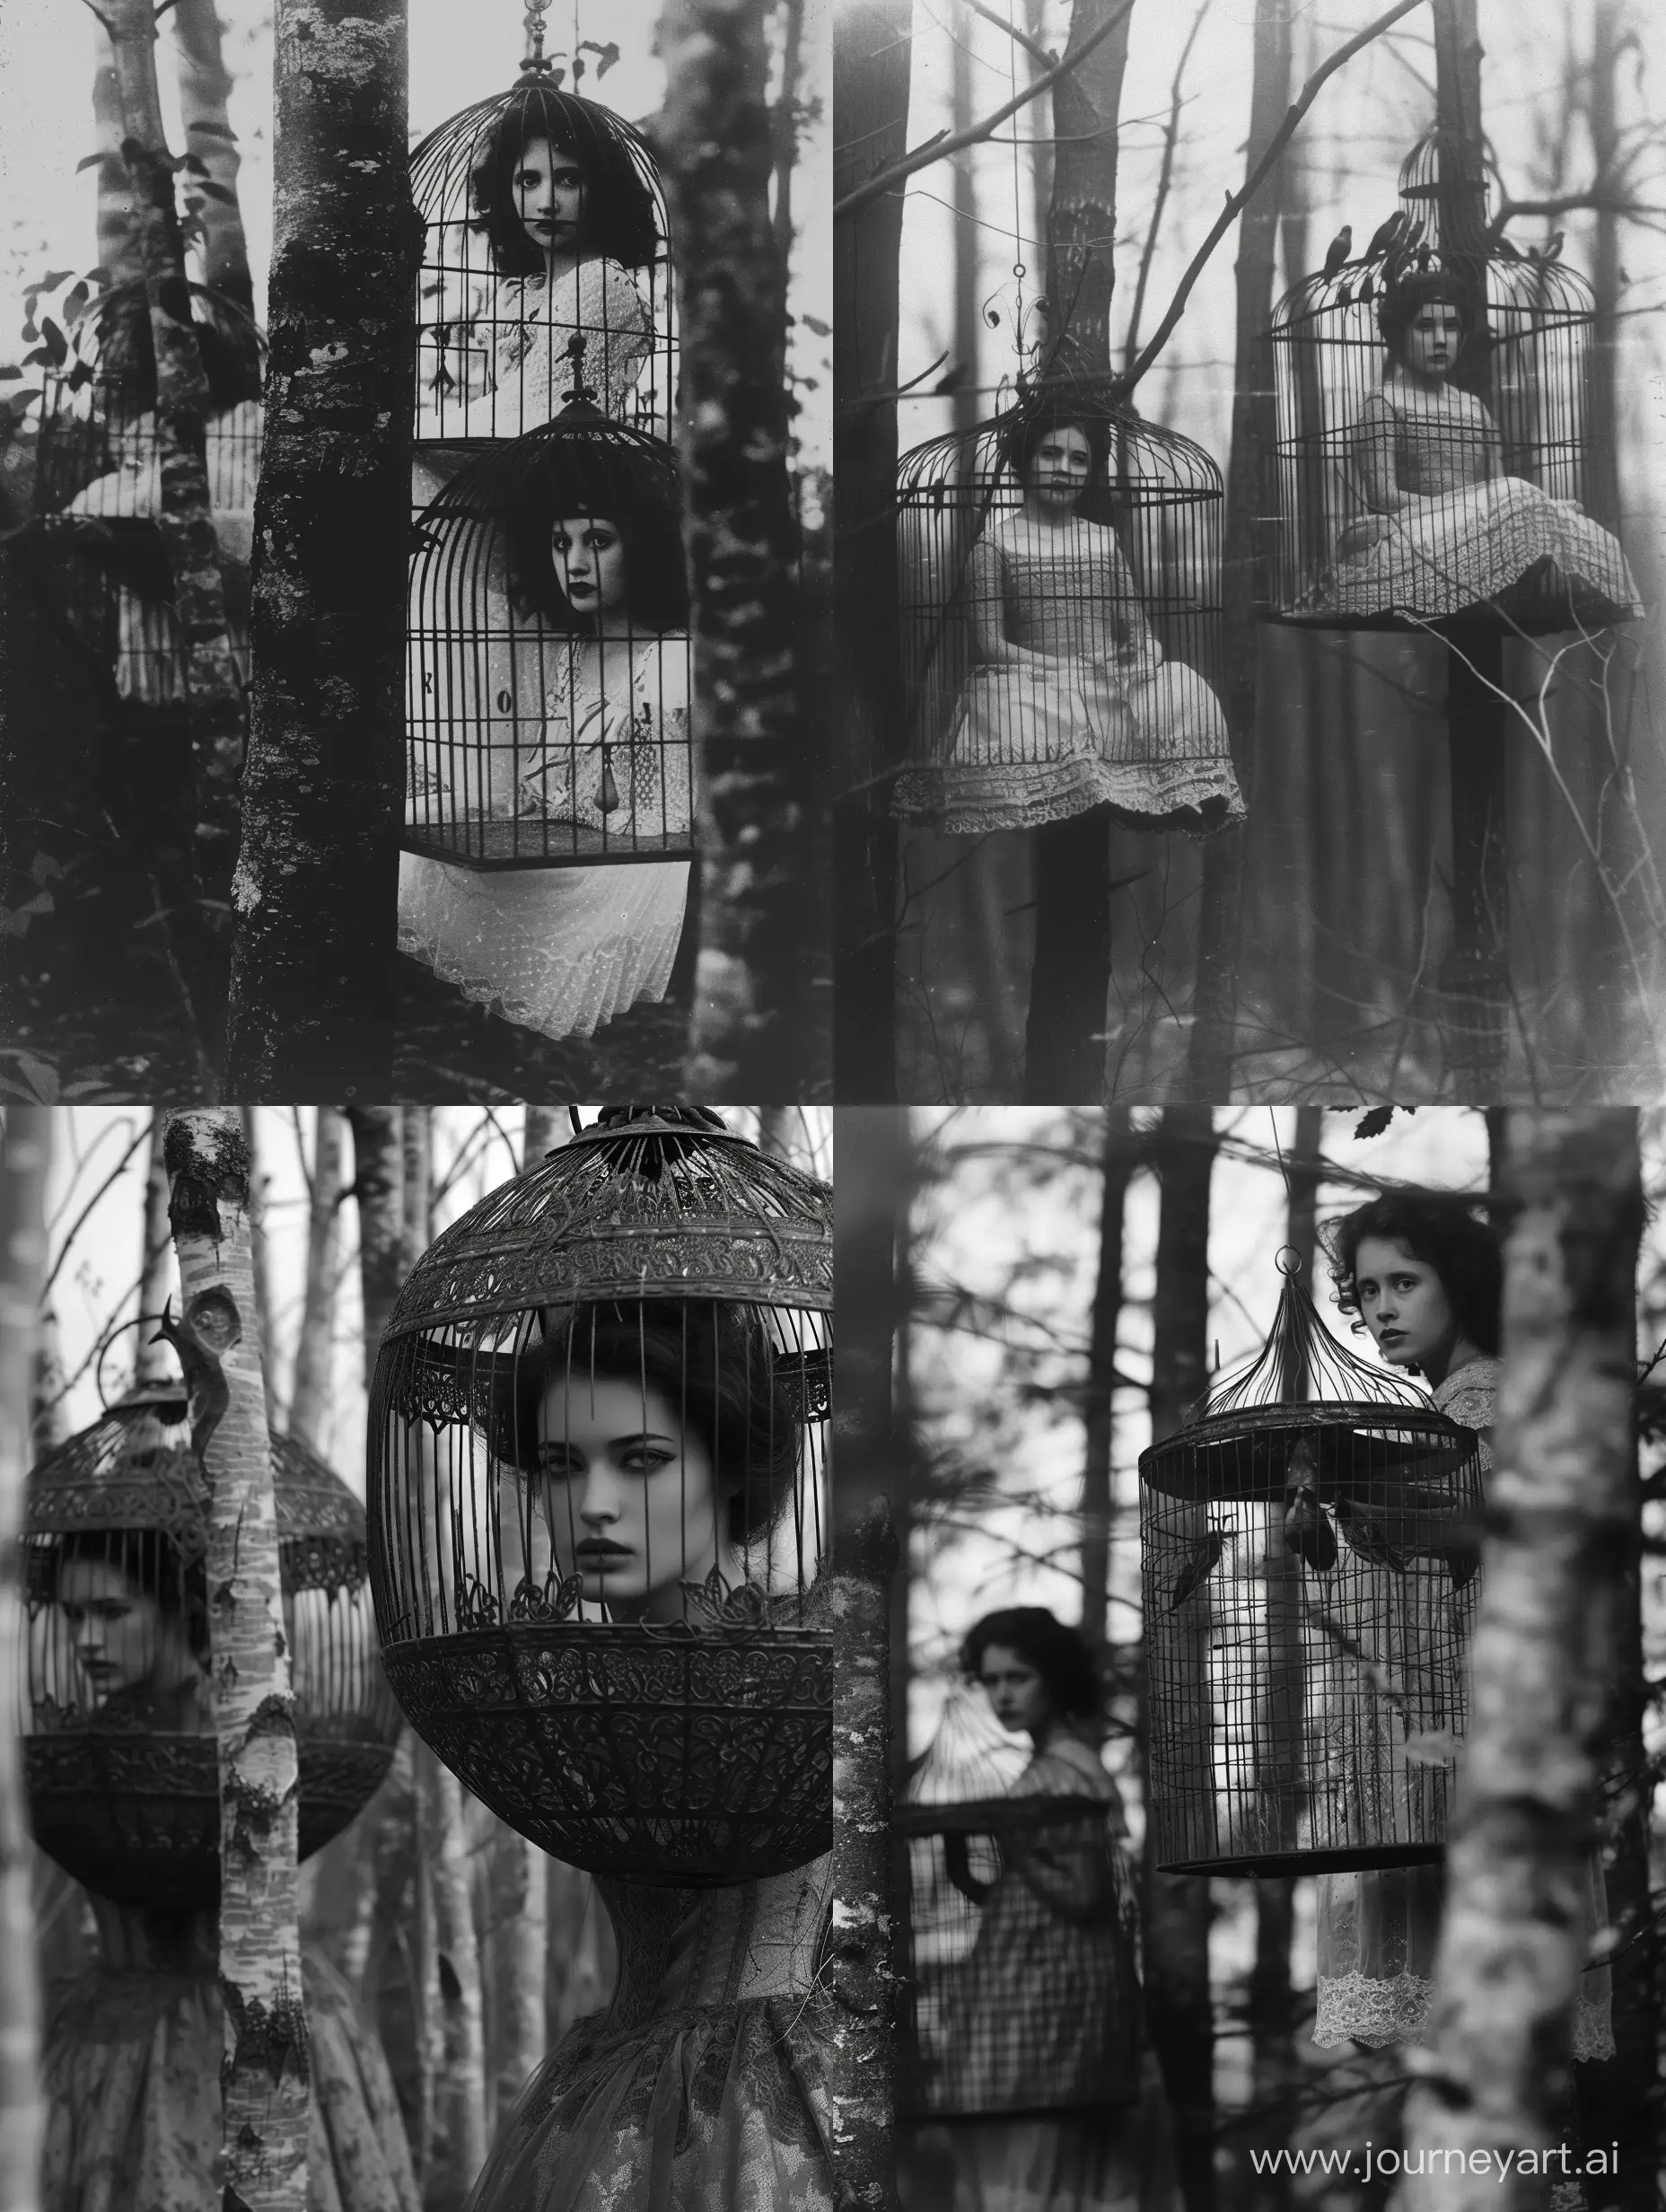 Enchanting-Women-in-Vintage-Dresses-within-Antique-Bird-Cages-A-Dark-Folk-Horror-Ritual